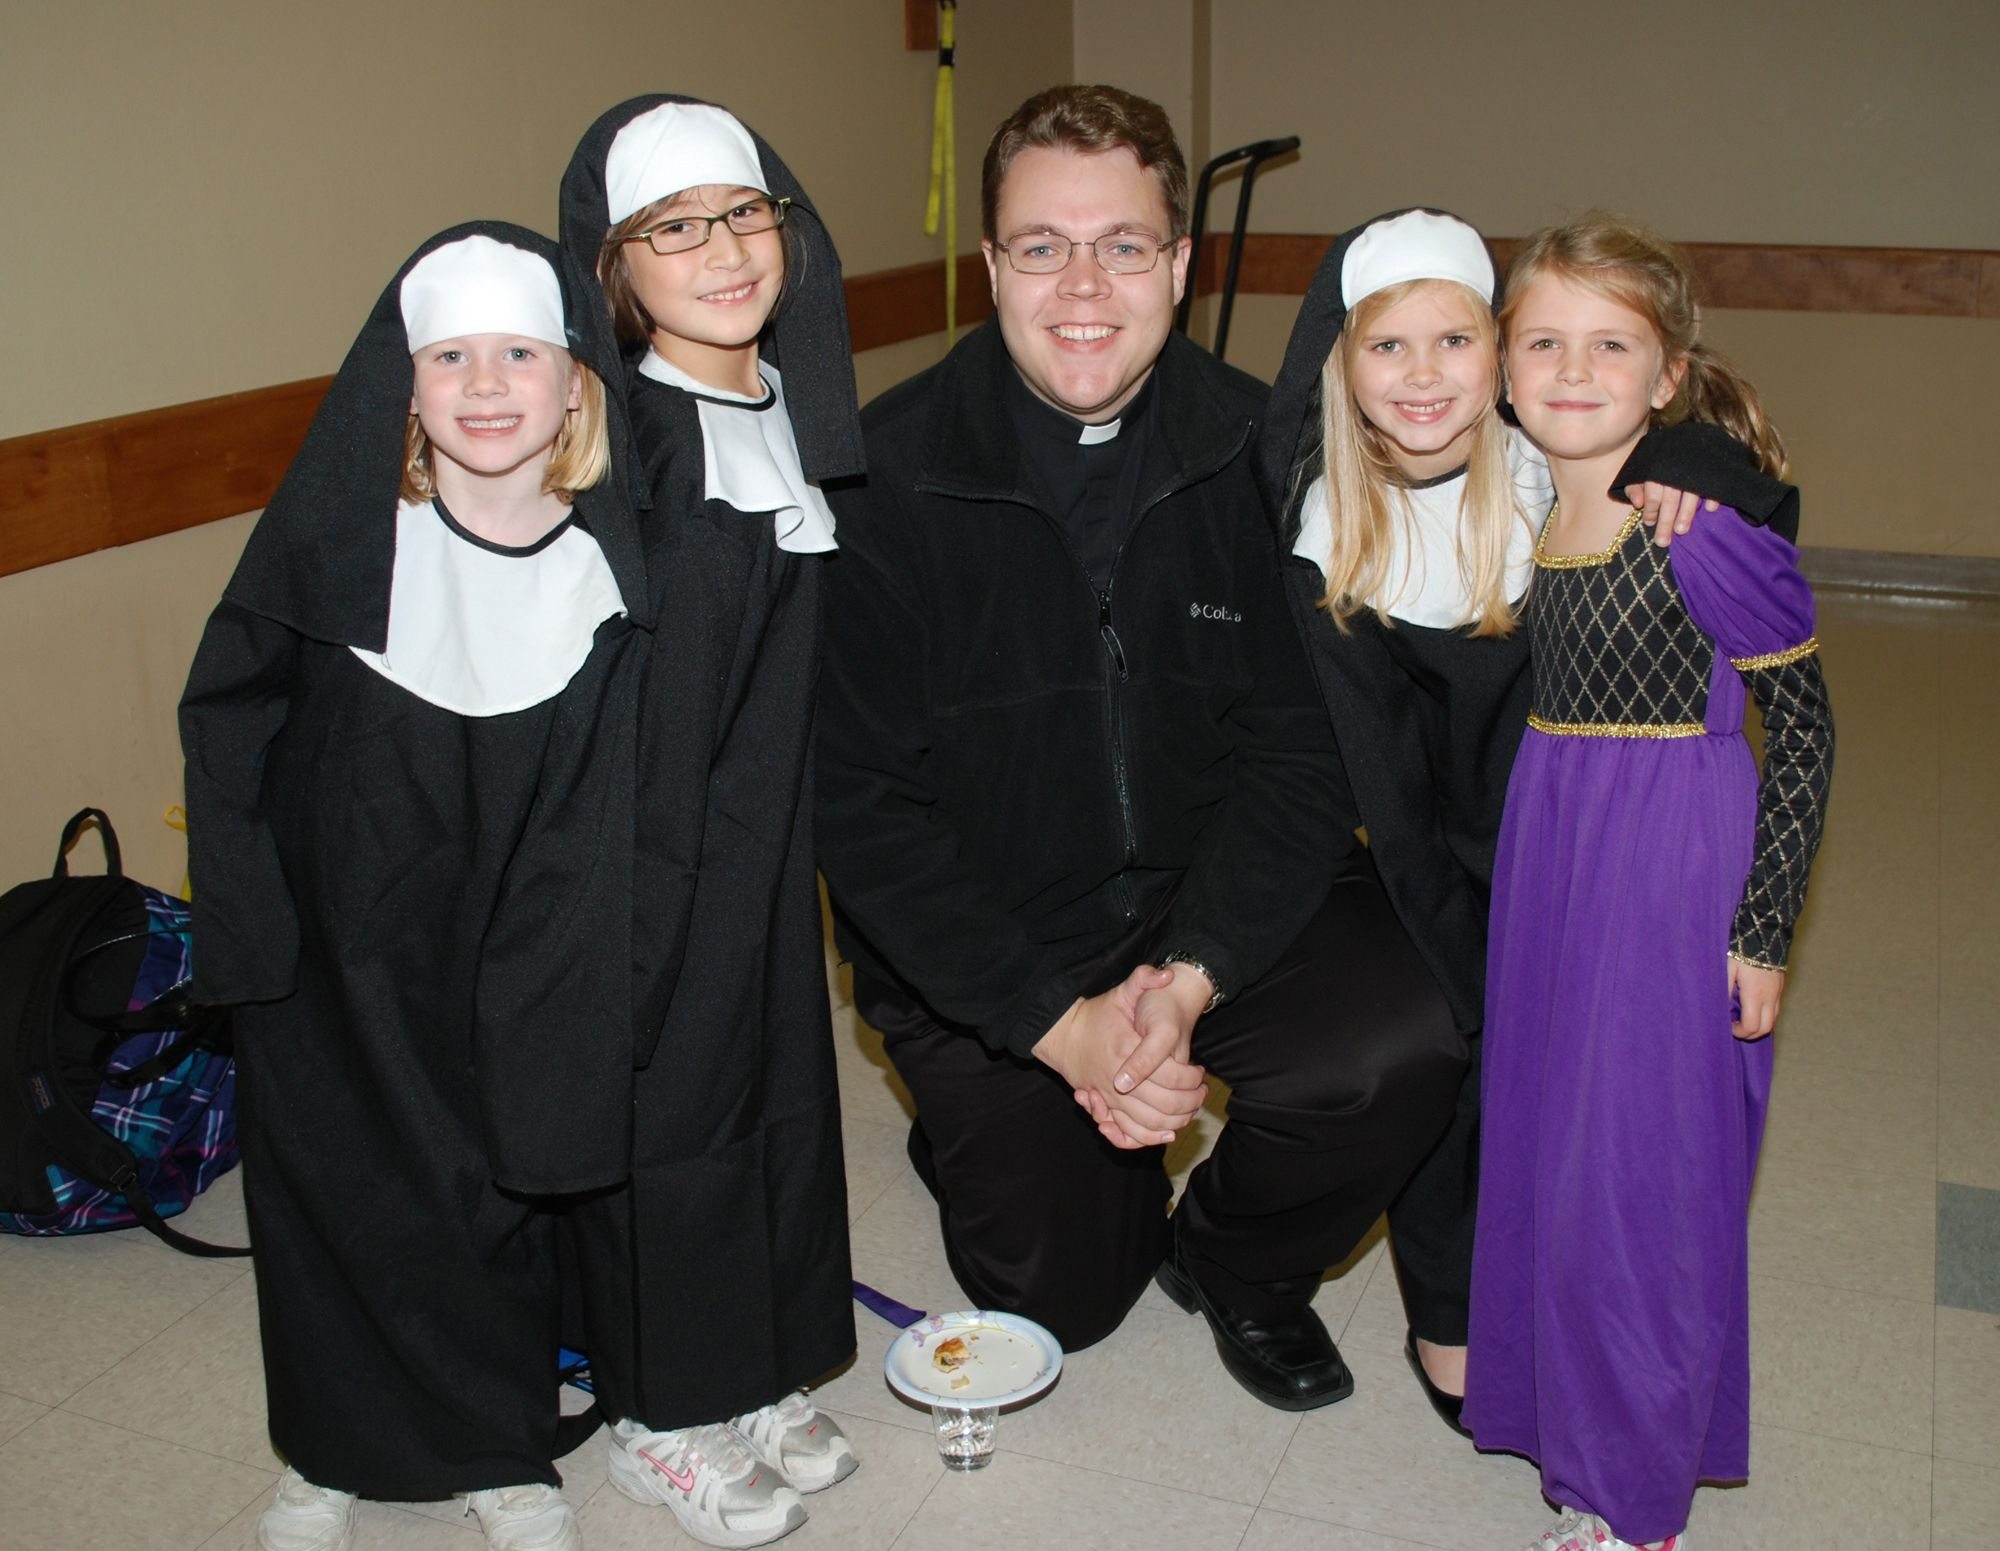 The Rev. Matthew Oakland visits with the mini-saints of Pacific Crest Academy. From left are: Campbell Deringer as St. Rose of Lima; Jane Brotherton at St. Jane; Hannah Jo Hammerstrom as St. Clare; and Anna Mooney as St.